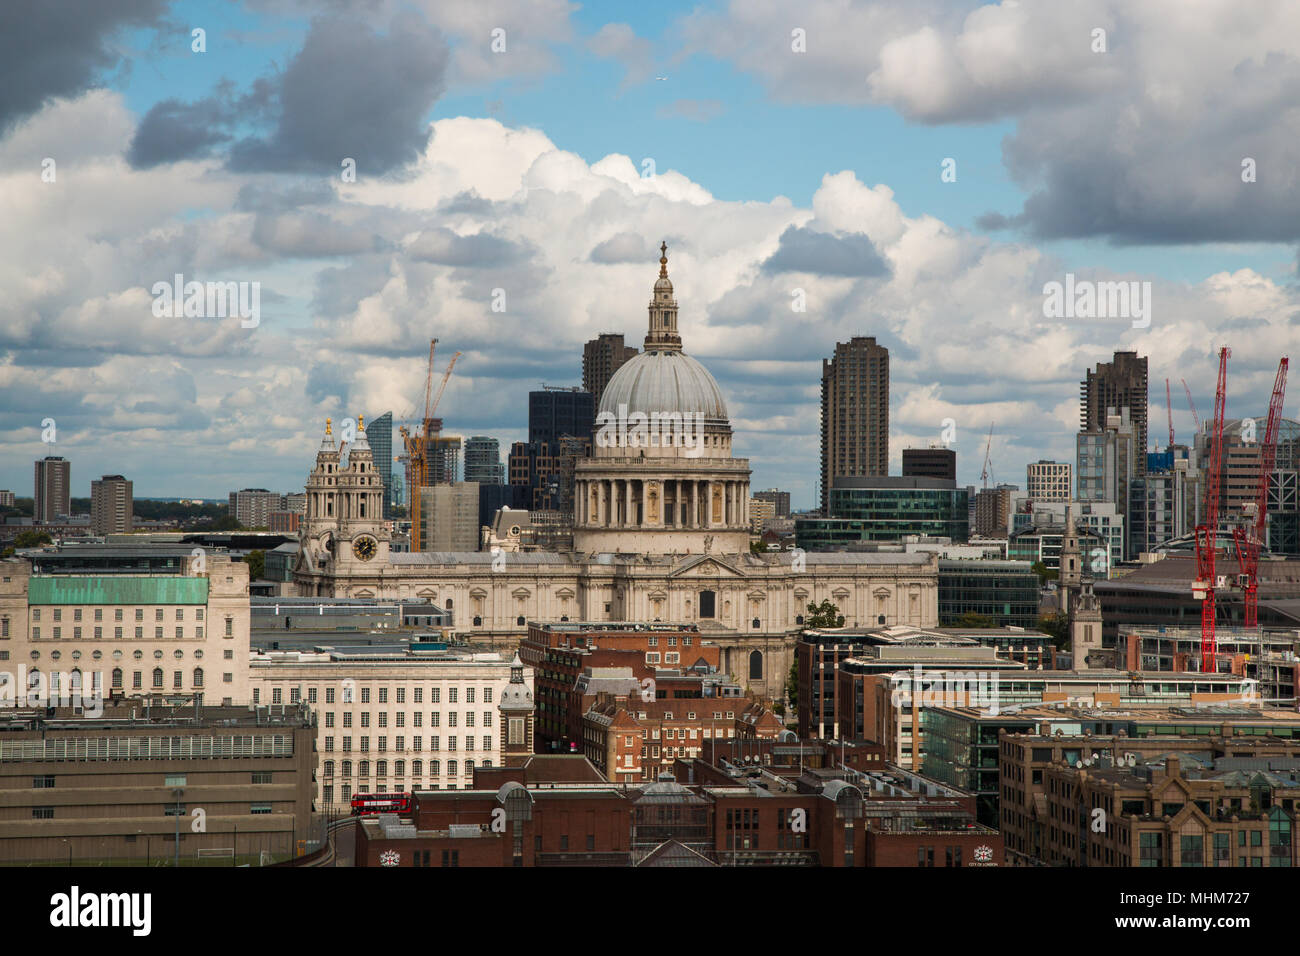 View from the Tate modern - London uk Stock Photo